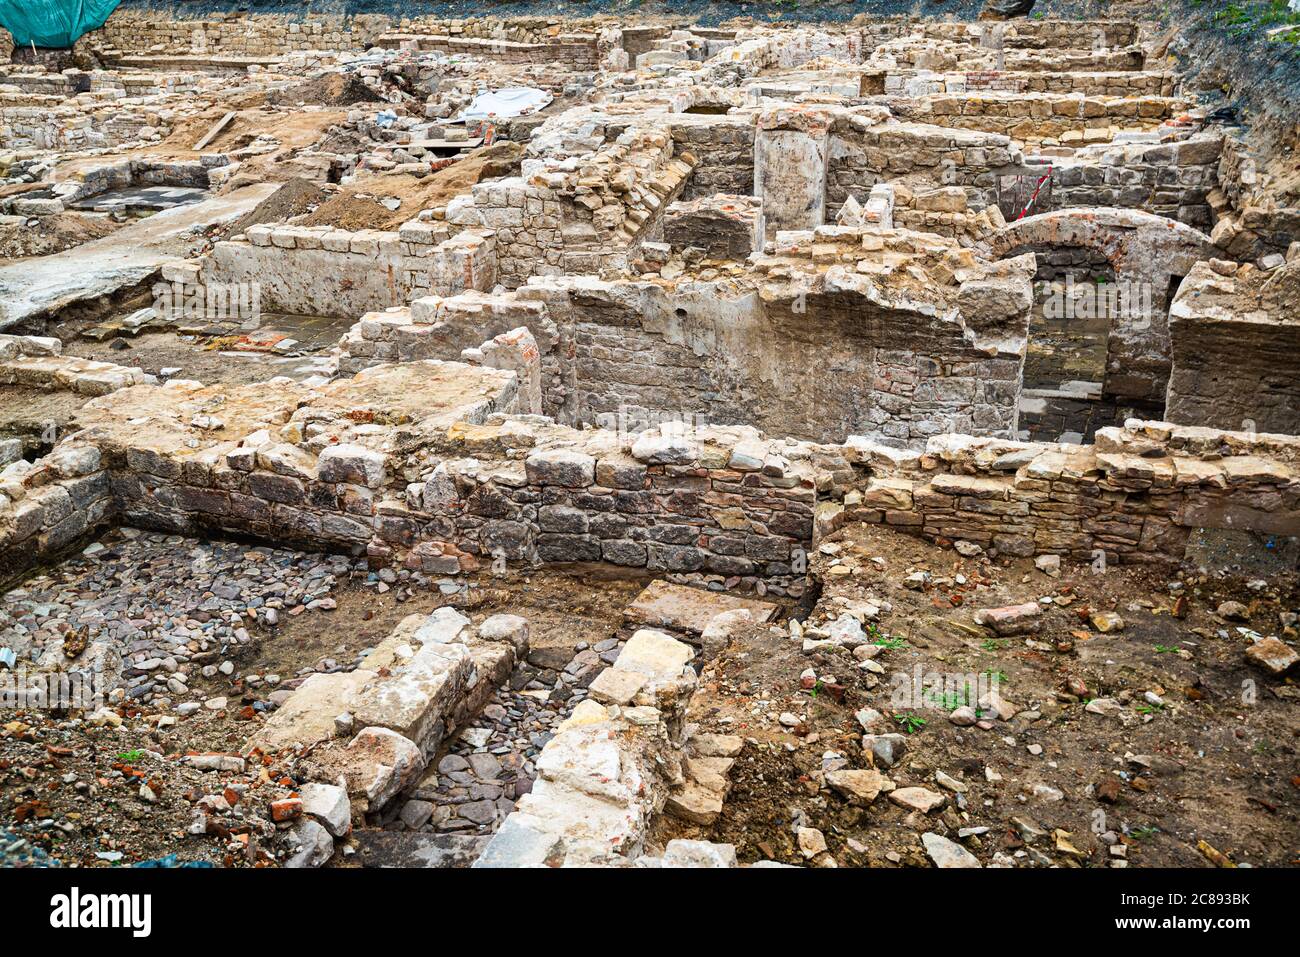 Nuremberg, Germany historical archeological excavation of an ancient site. Stock Photo